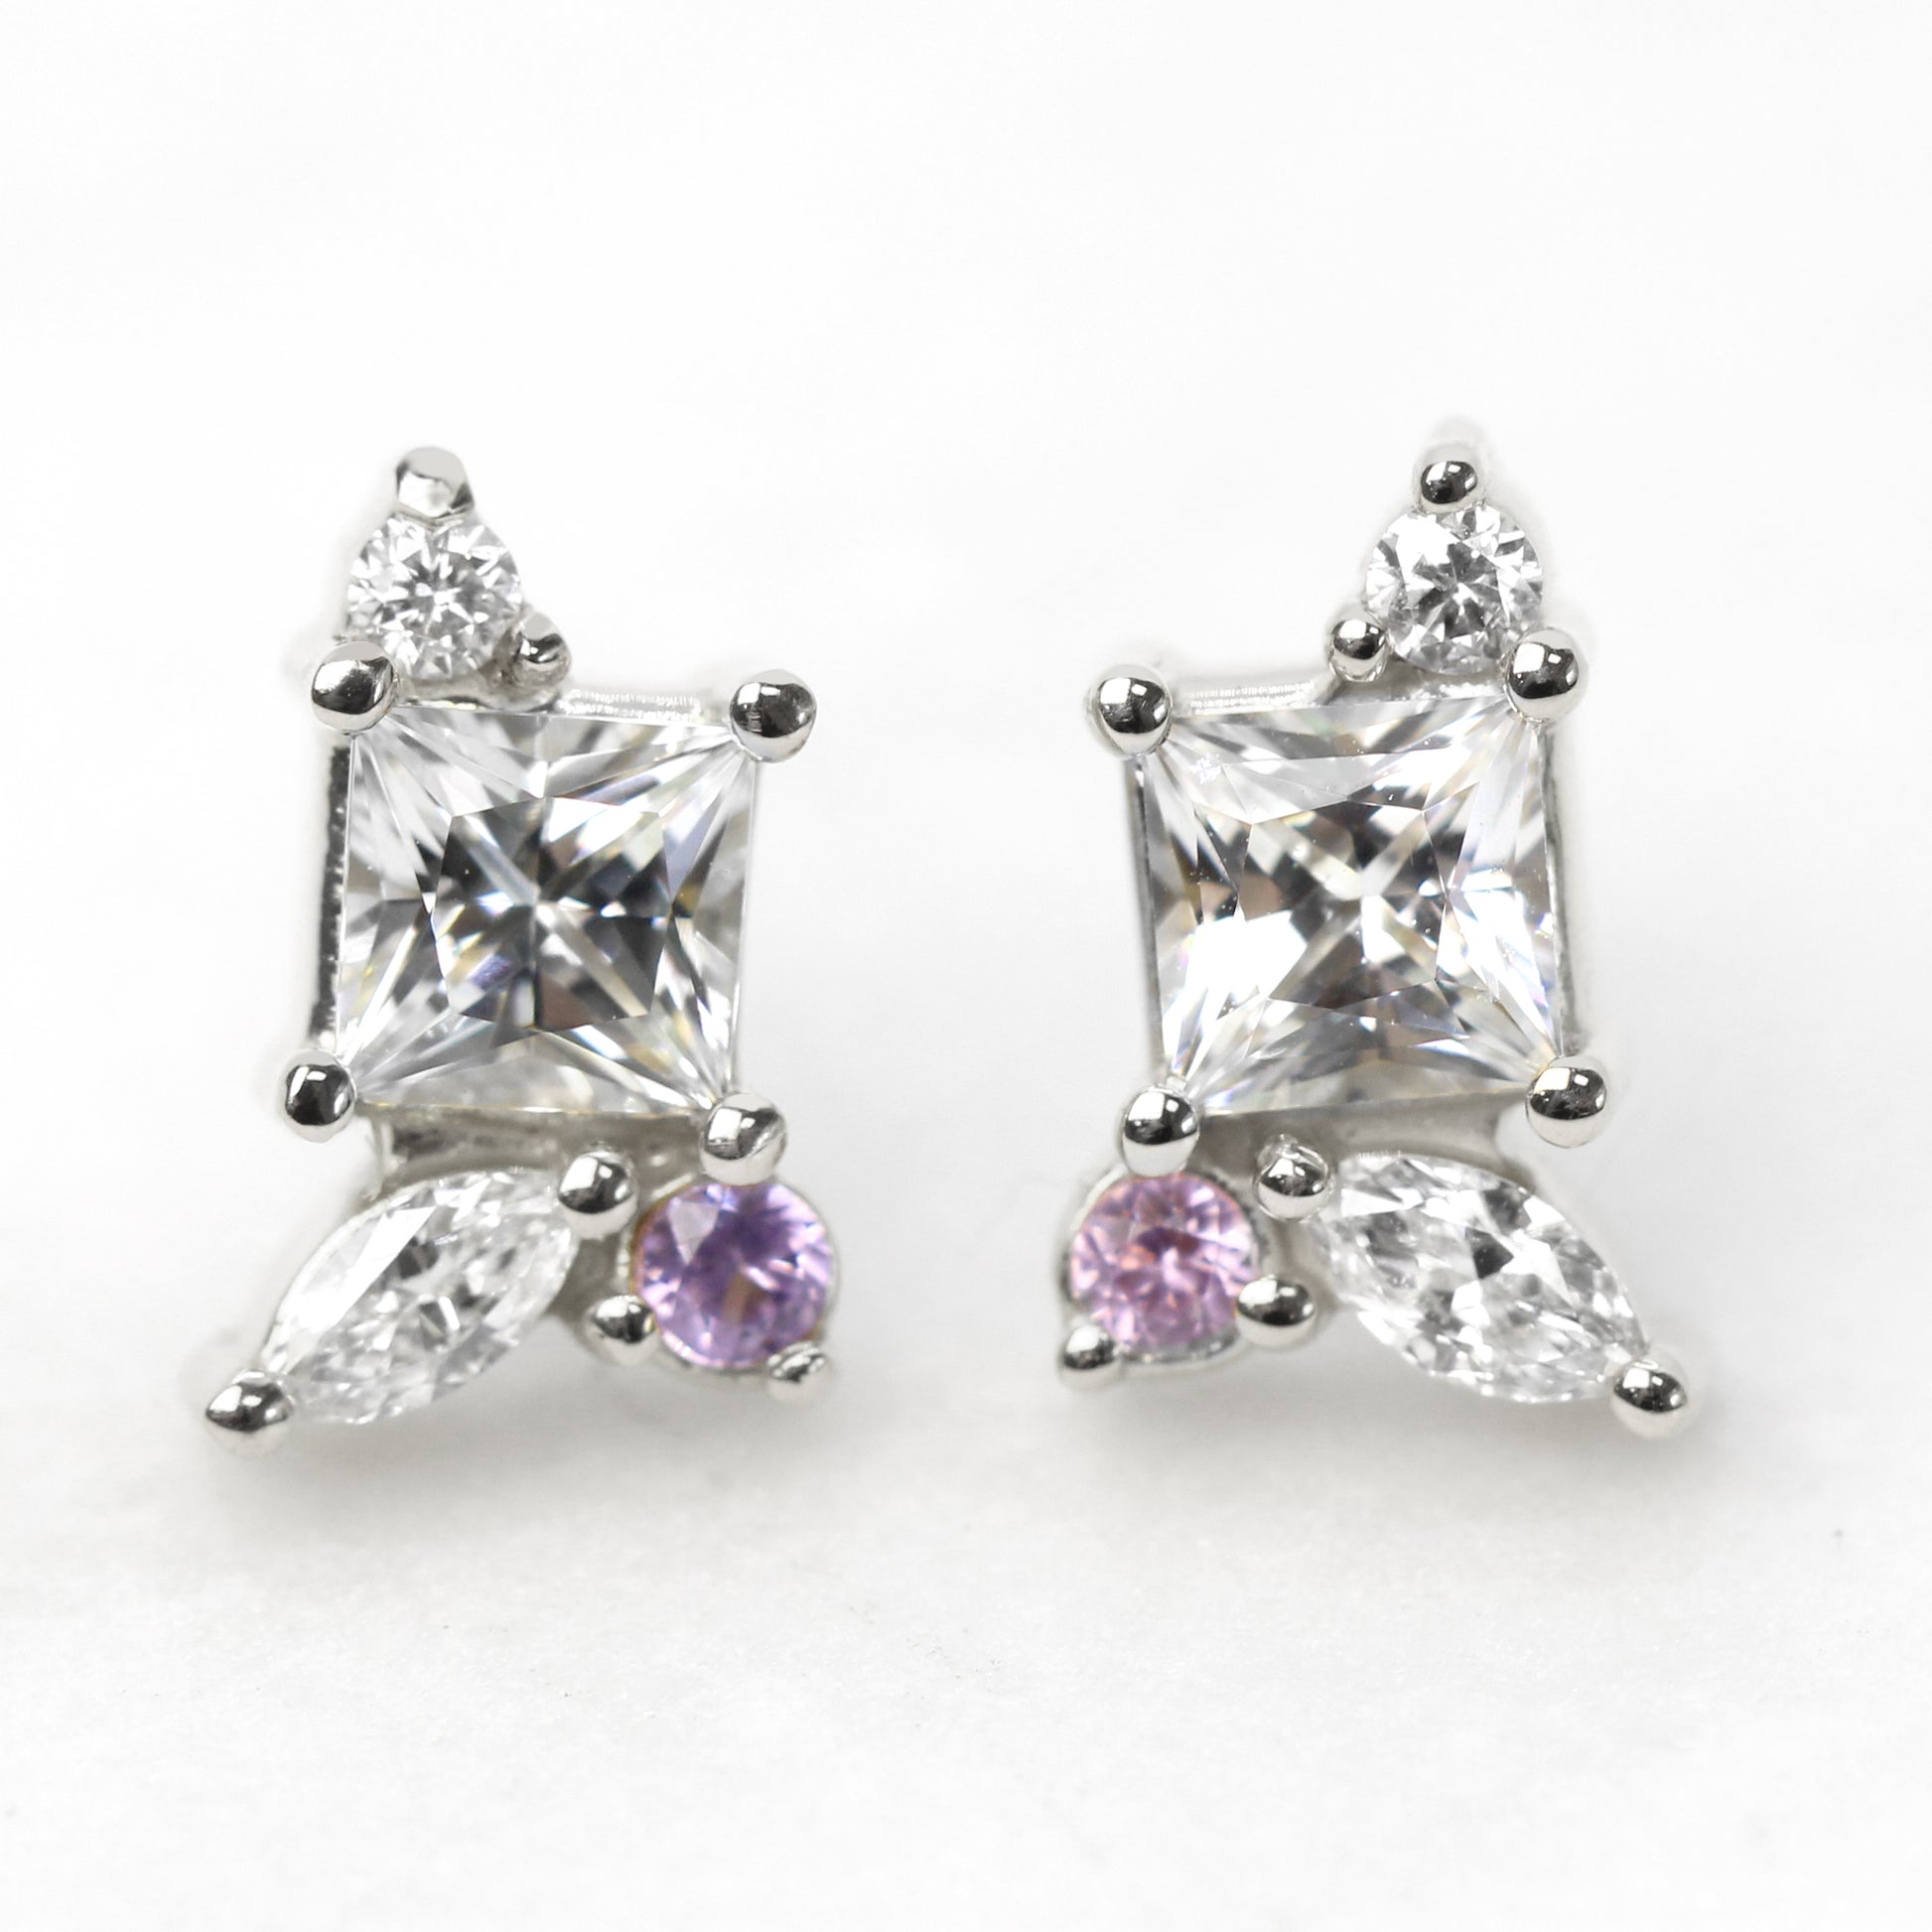 CAELEN (M) Princess Cut White Sapphire Cluster Earrings with Diamond & Pink Sapphire Accents - Made to Order, Your Choice of 14k Gold - Midwinter Co. Alternative Bridal Rings and Modern Fine Jewelry